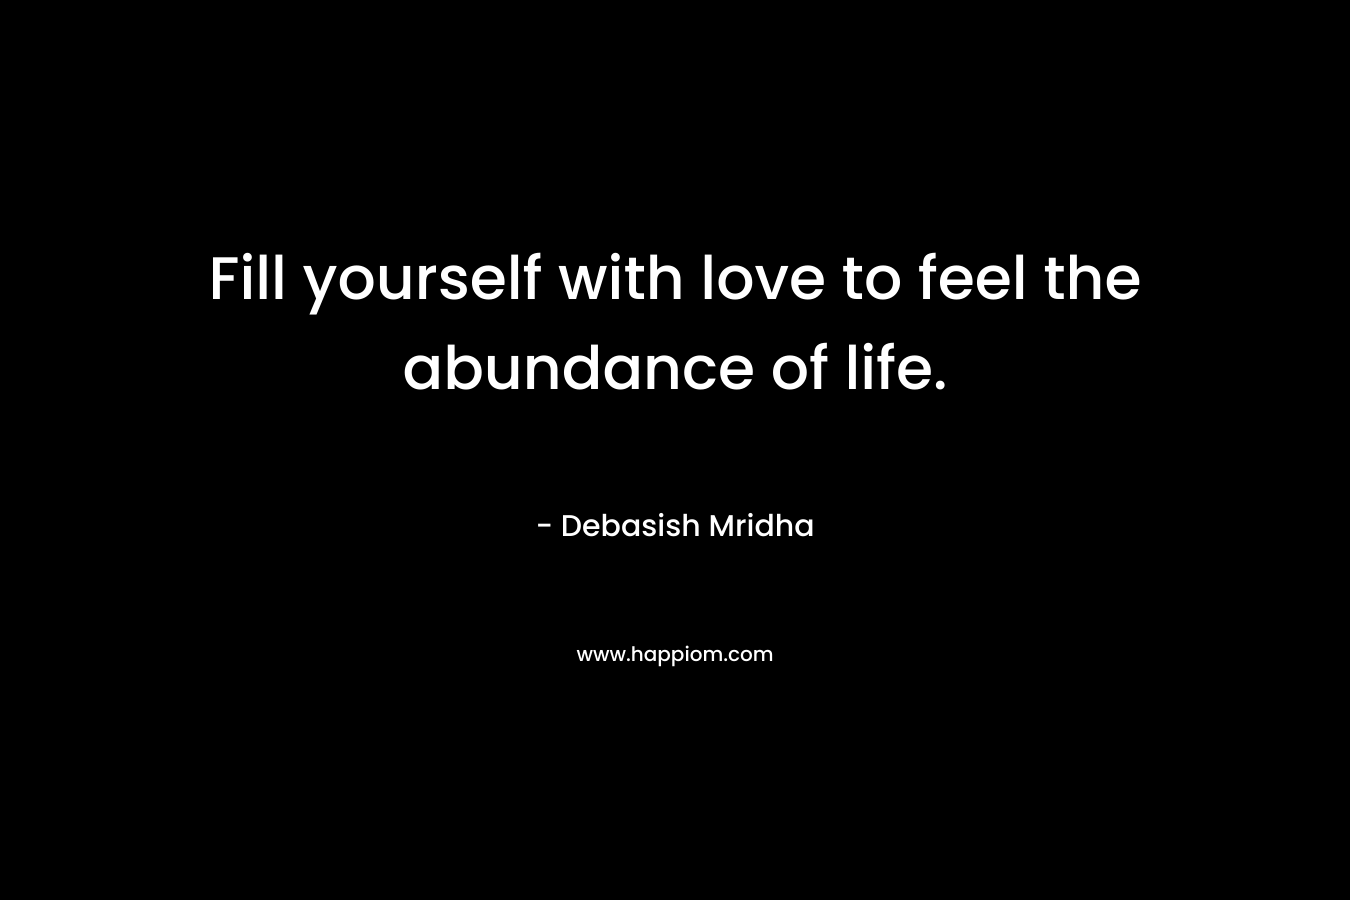 Fill yourself with love to feel the abundance of life.